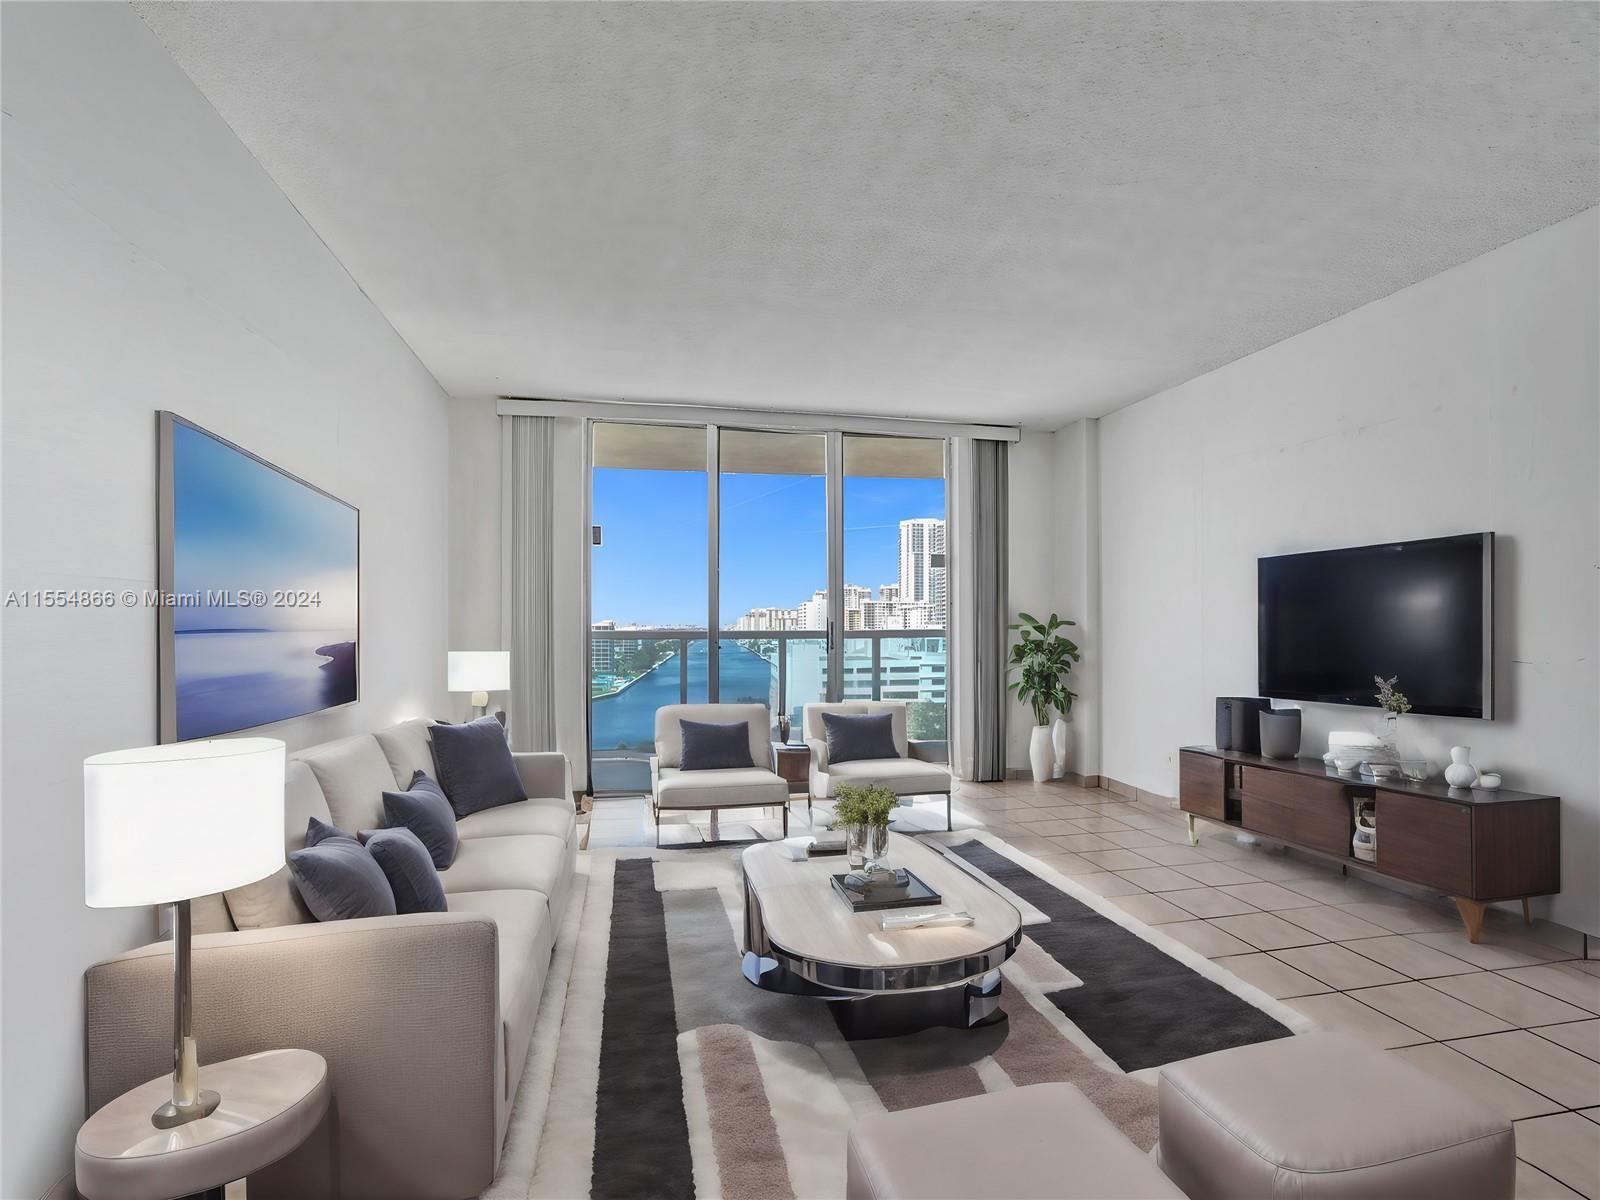 Welcome to your coastal oasis at Hallmark of Hollywood! This exquisite 2 Beds/2 Baths condo offers u